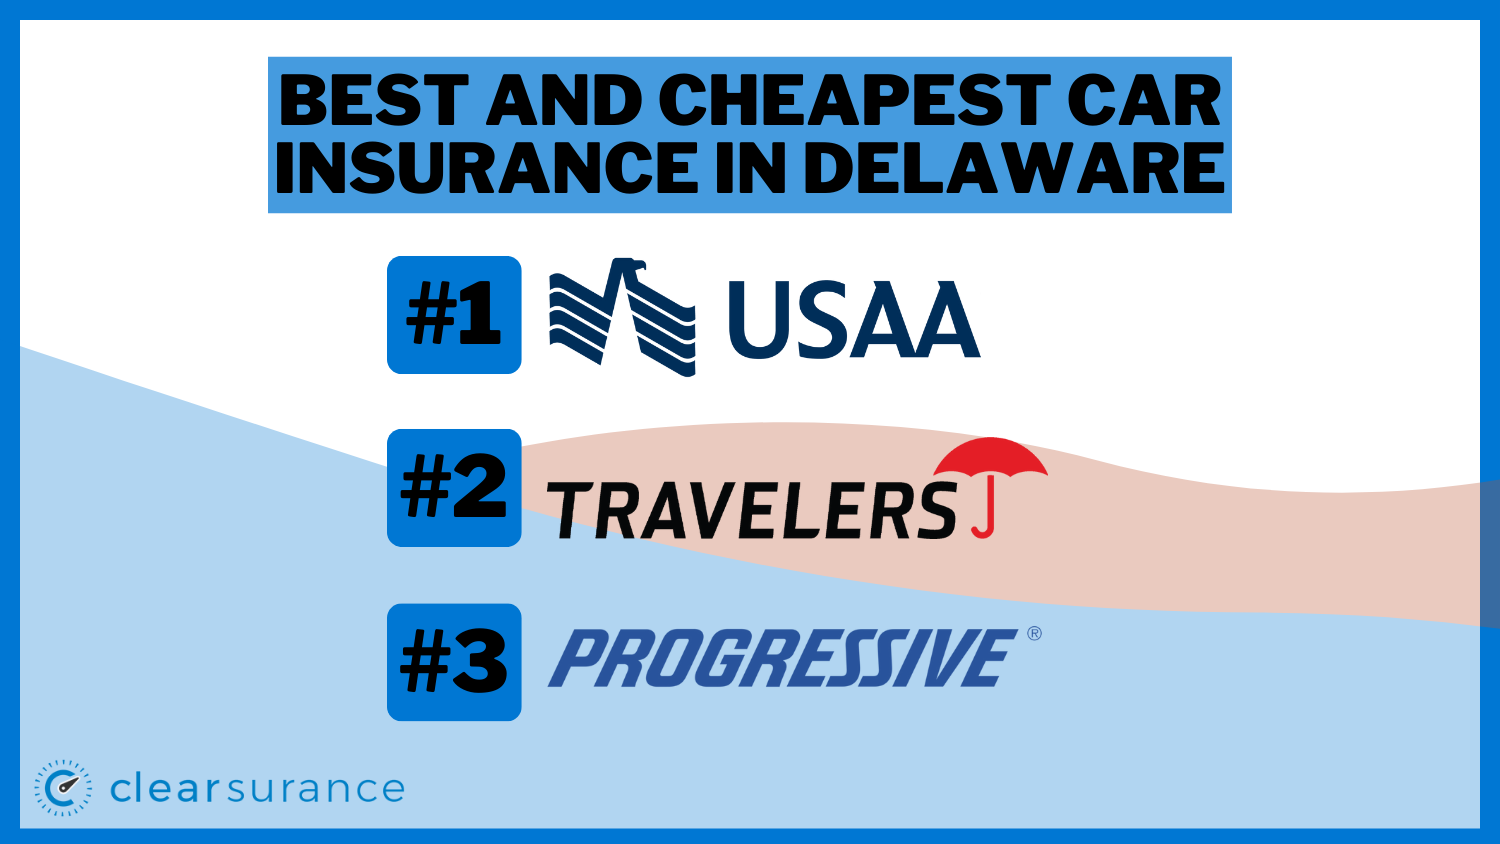 Best and Cheapest Car Insurance in Delaware: USAA, Travelers, Progressive